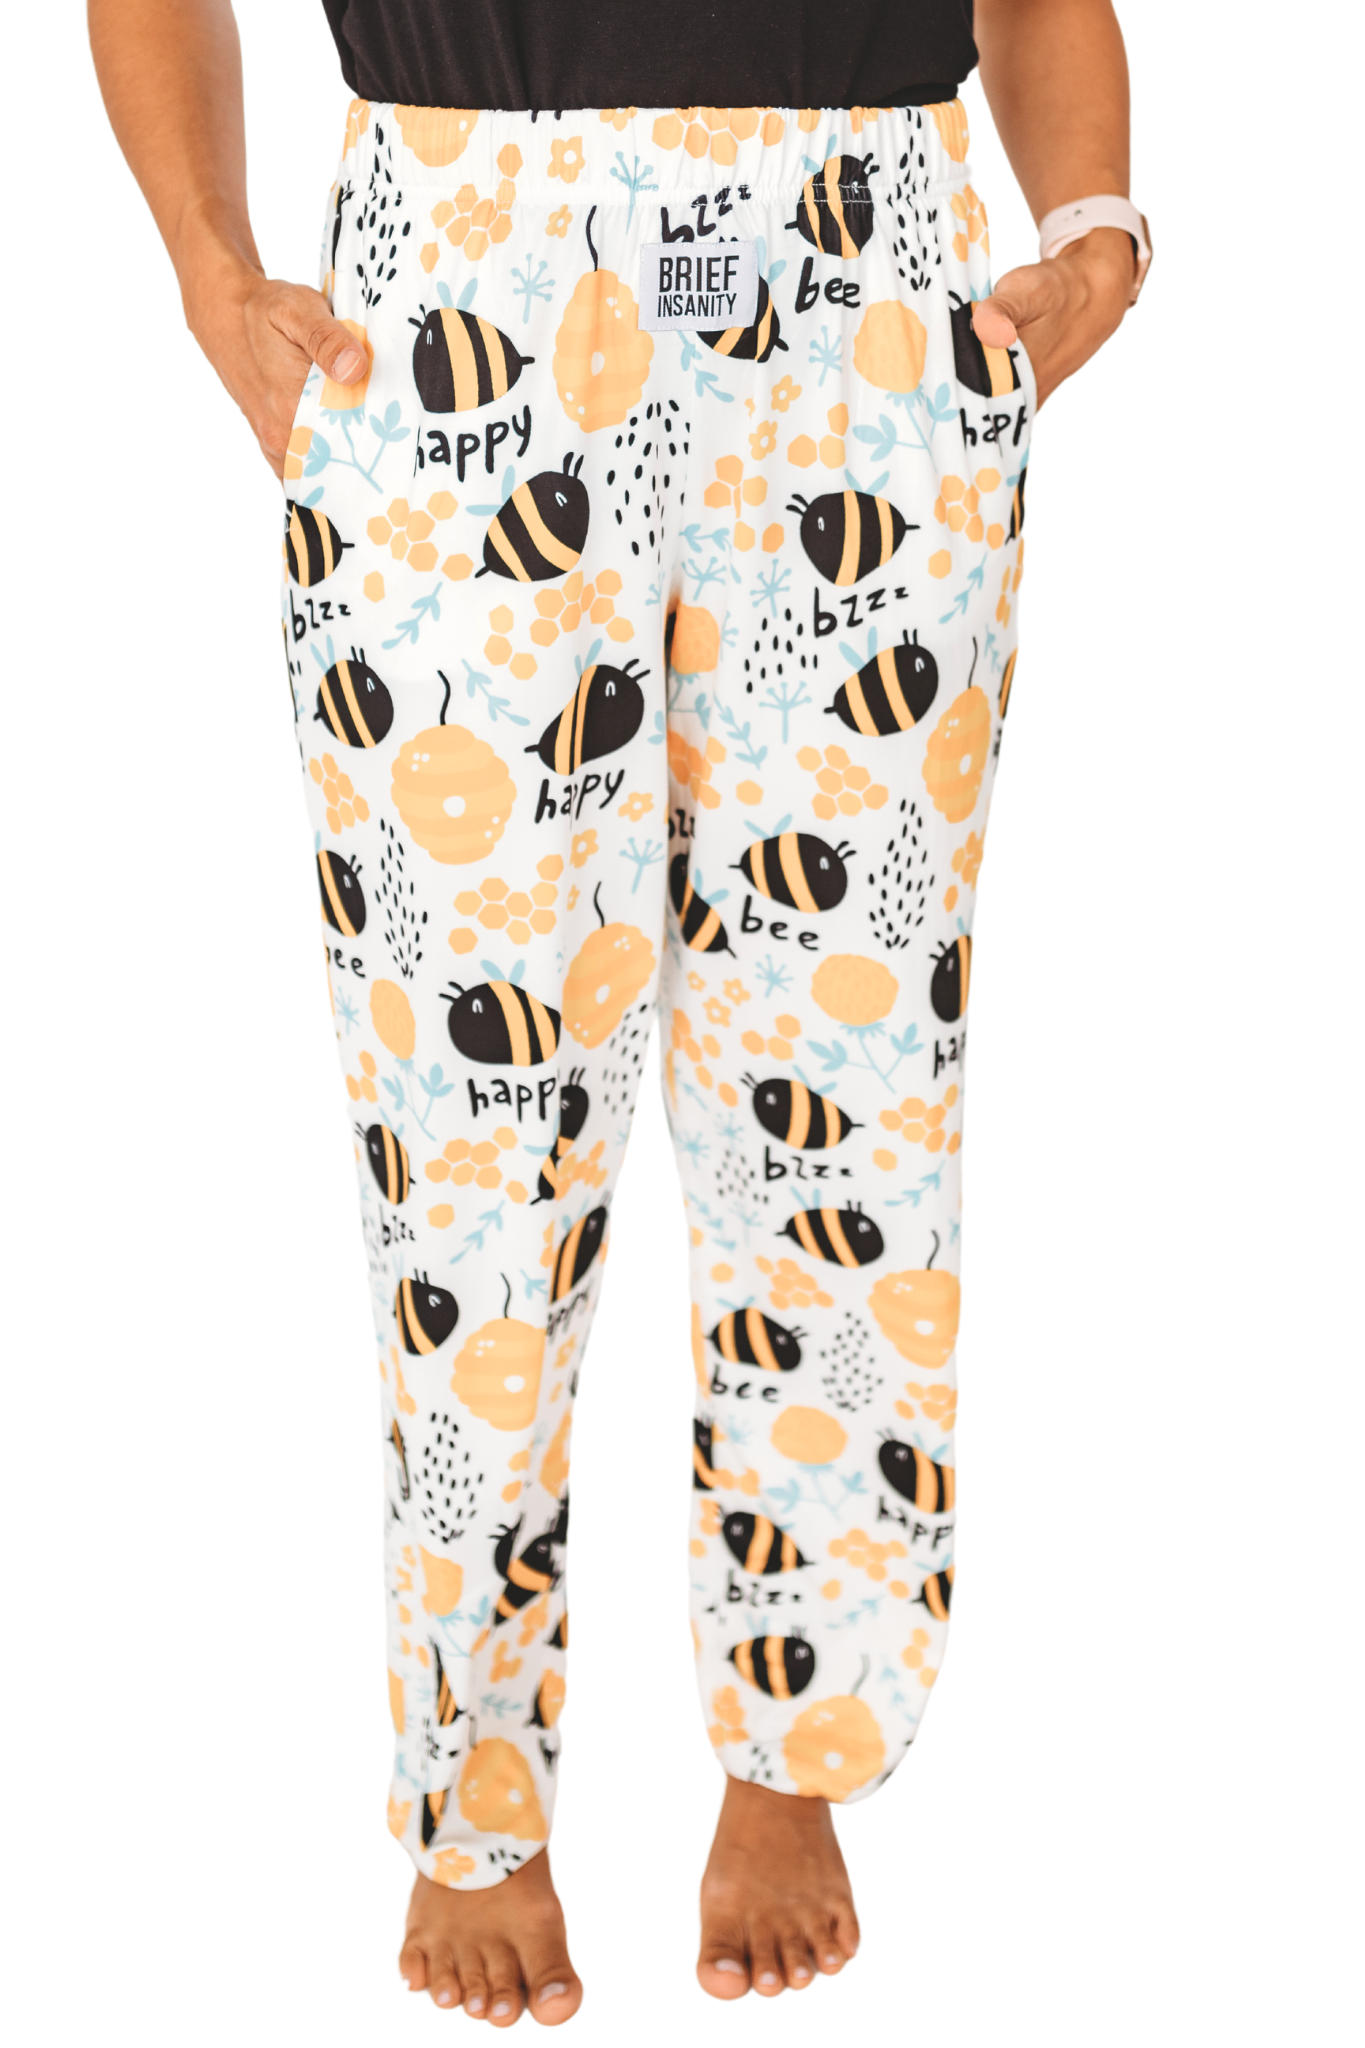 Waist down photo of model wearing Honey Bee pajama lounge pants front view (white background)